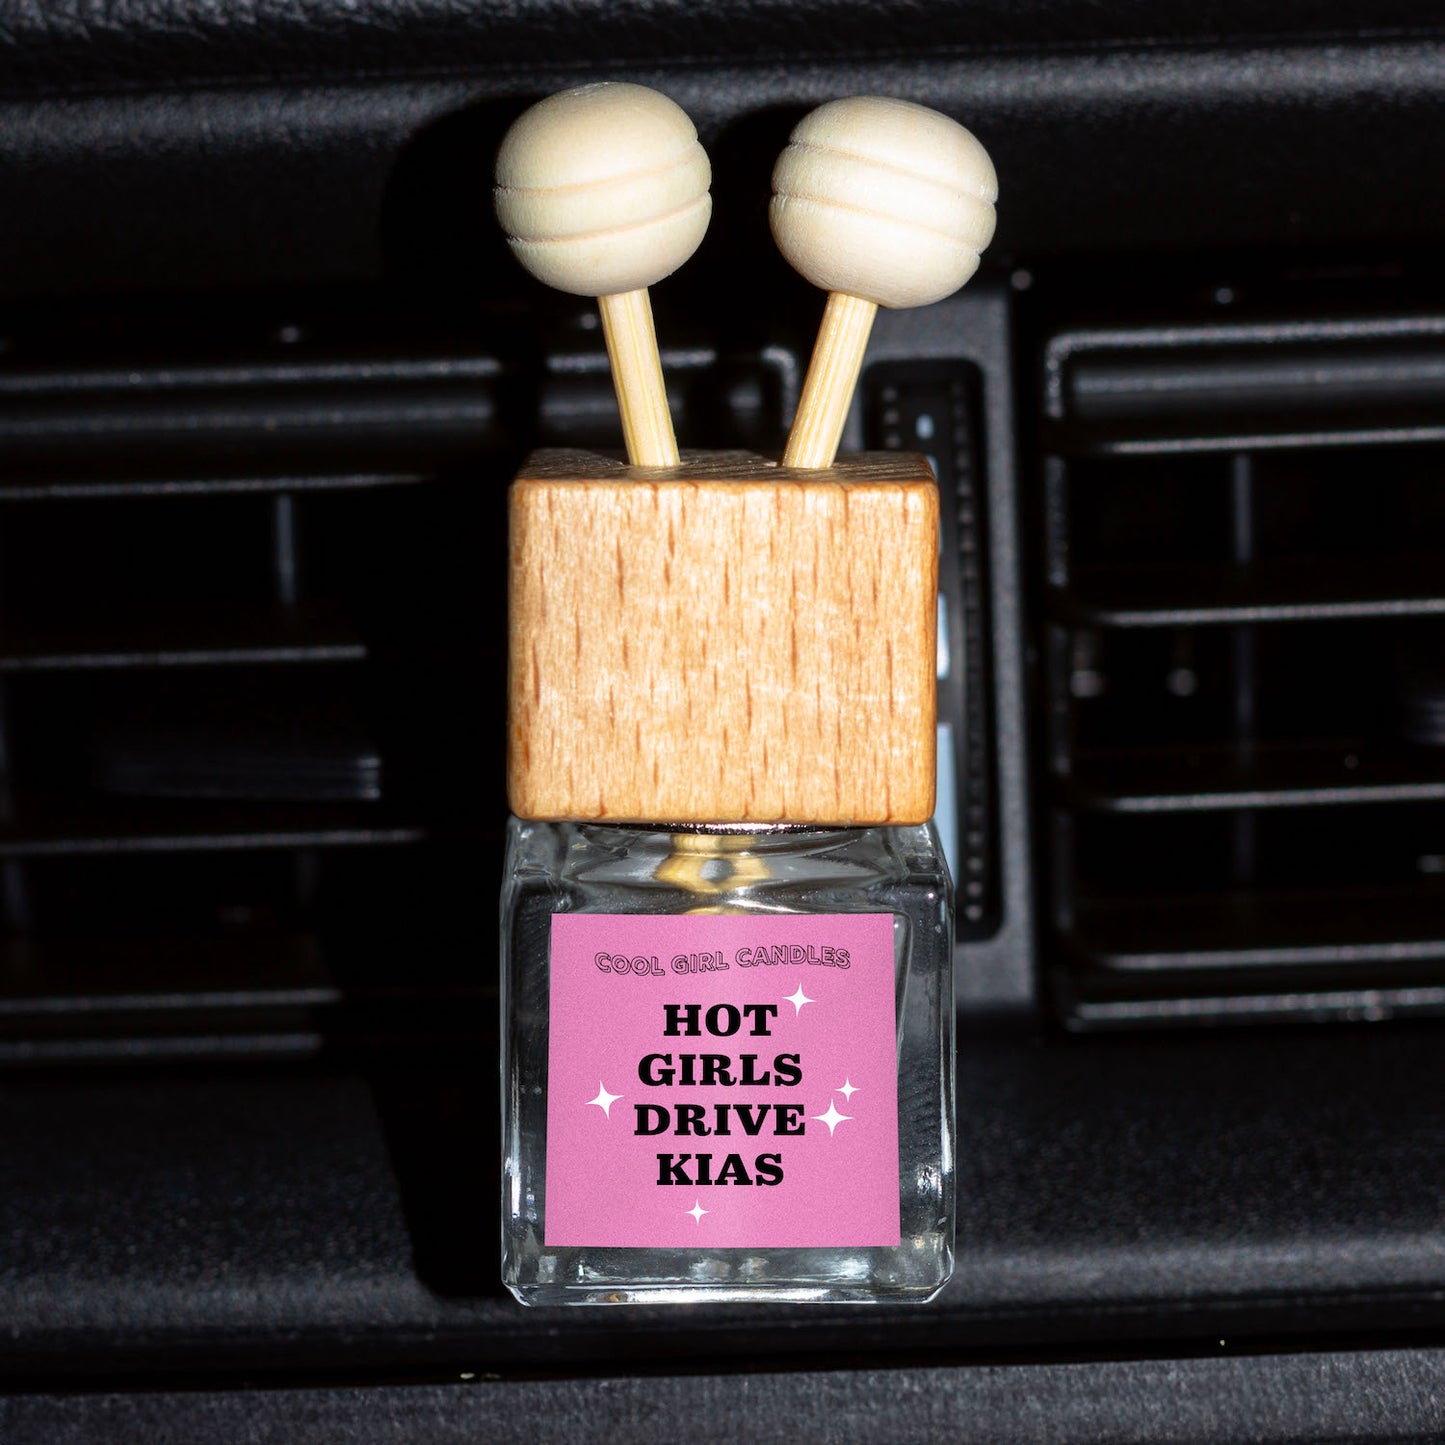 Hot Girls Drive Scented Car Fresheners – Cool Girl Candles